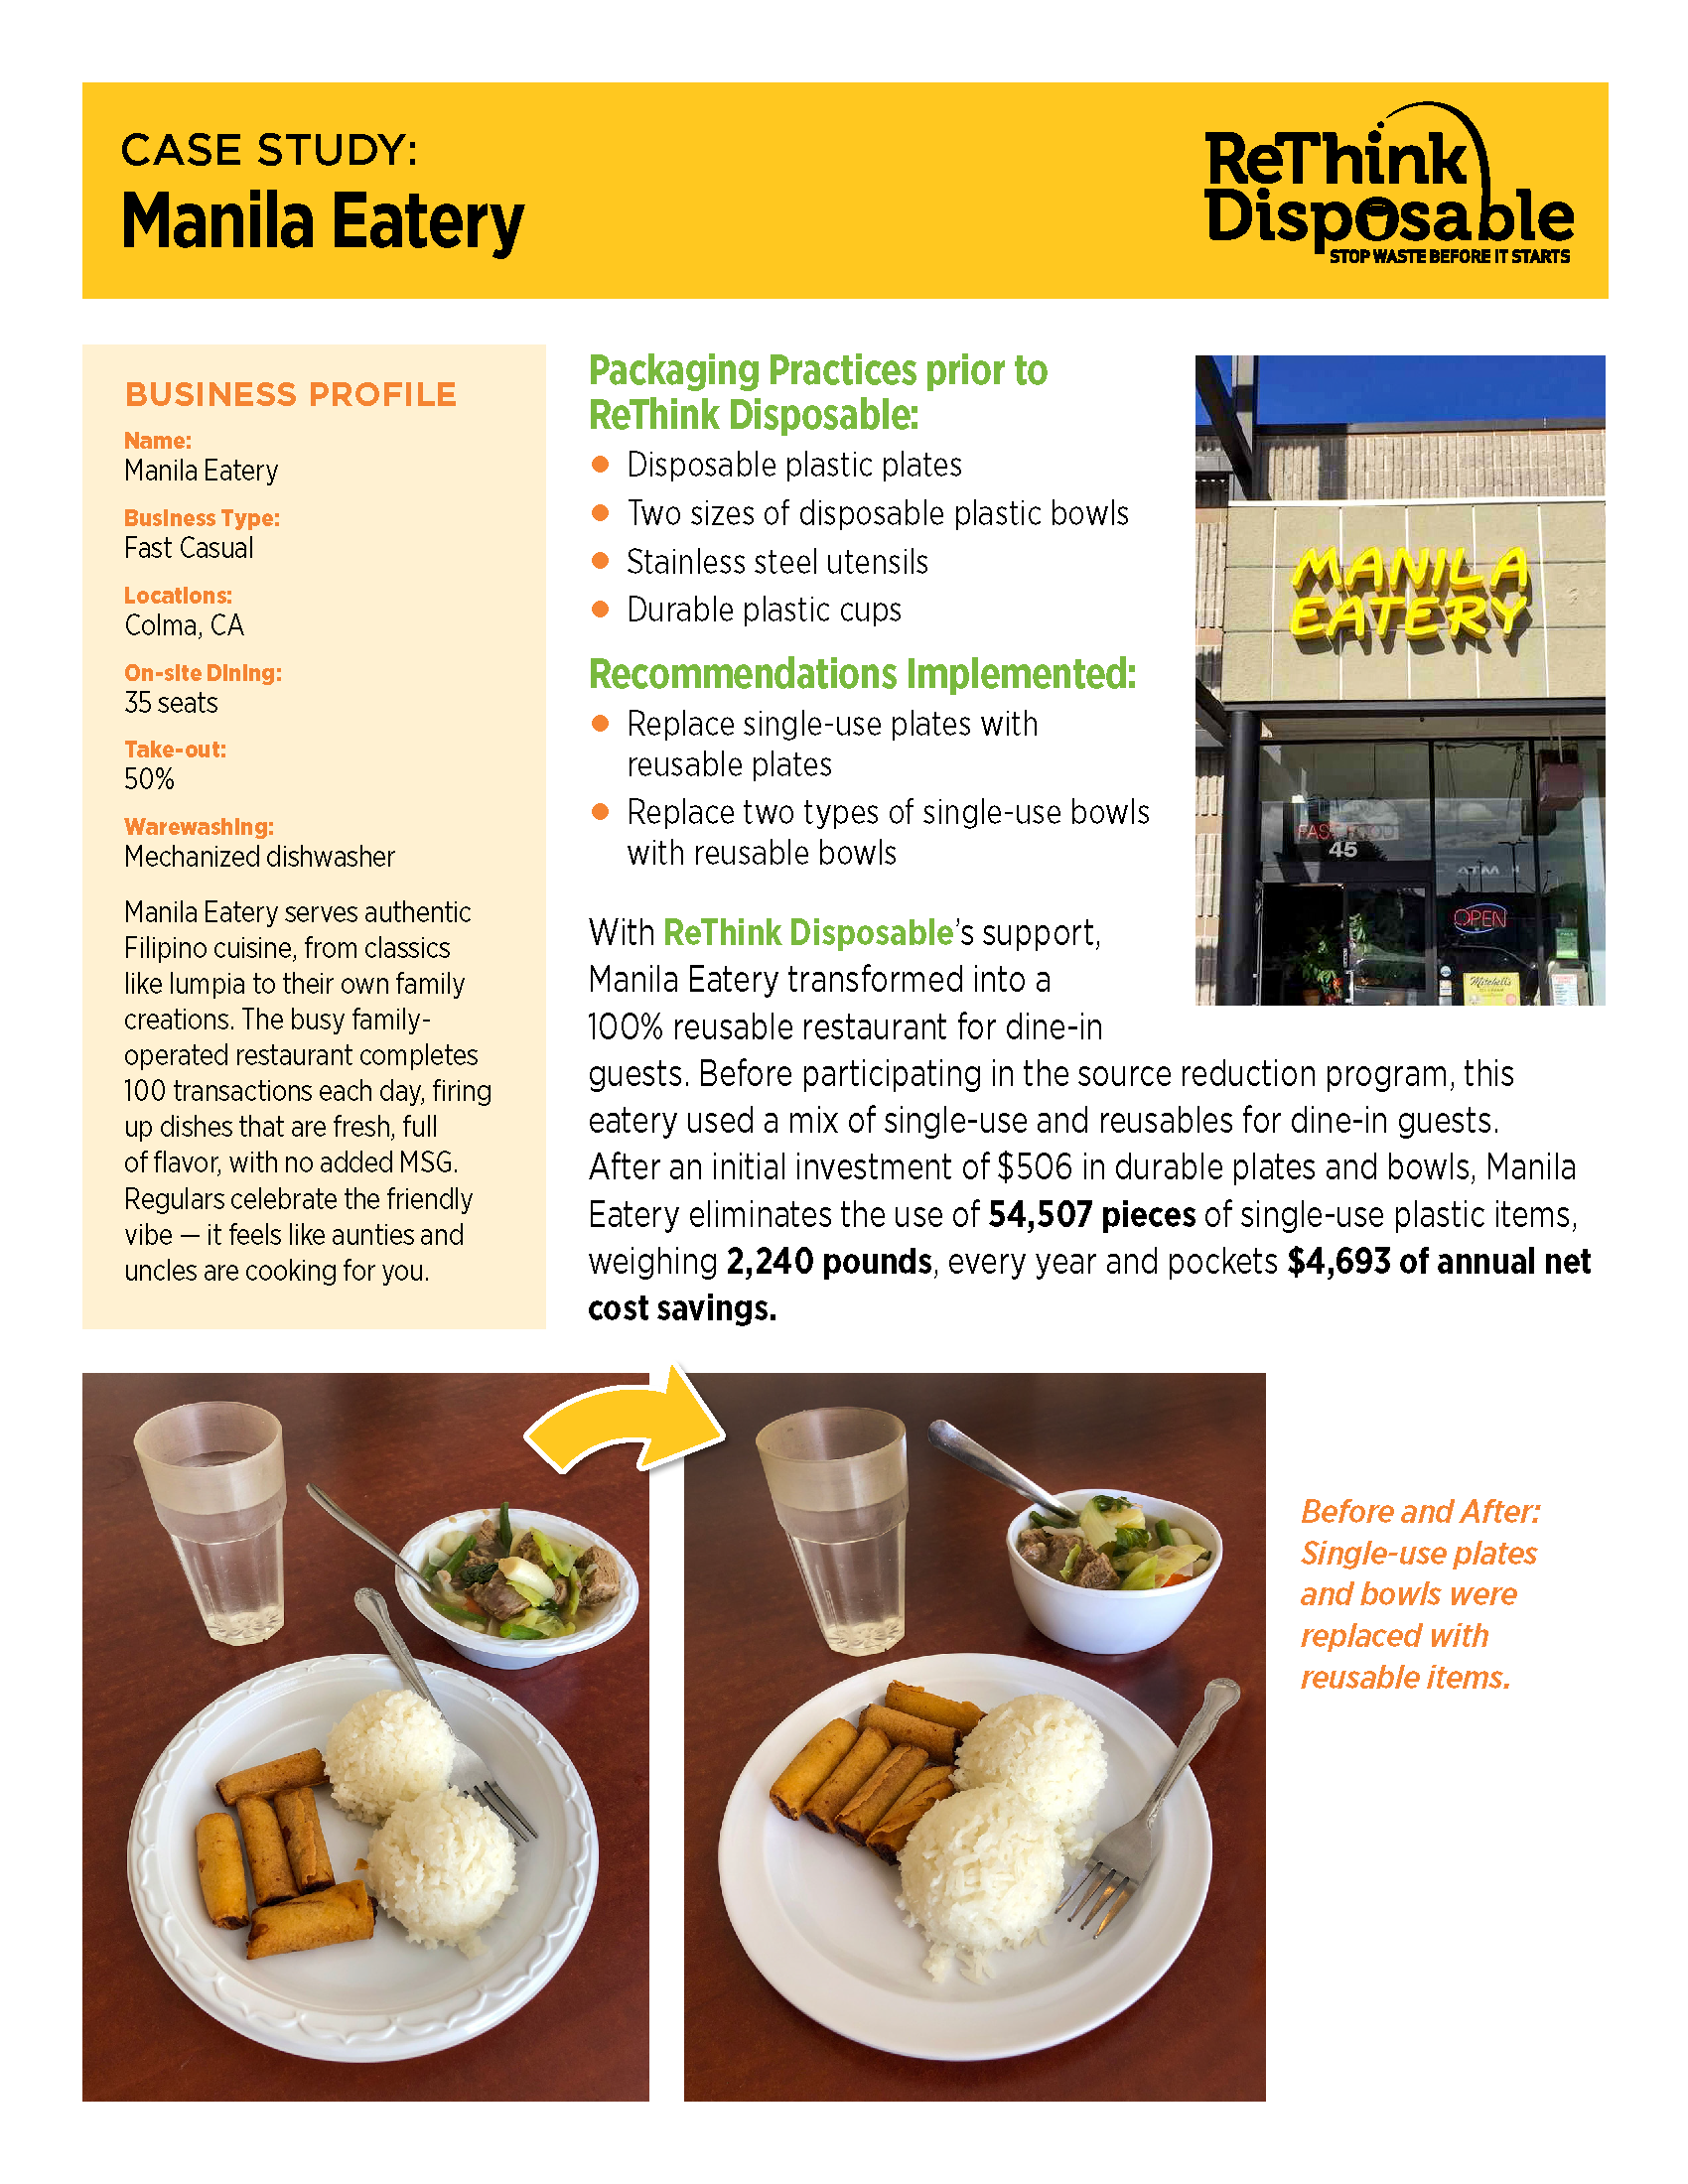 ReThink Disposable Case Study | Manila Eatery, Page 1